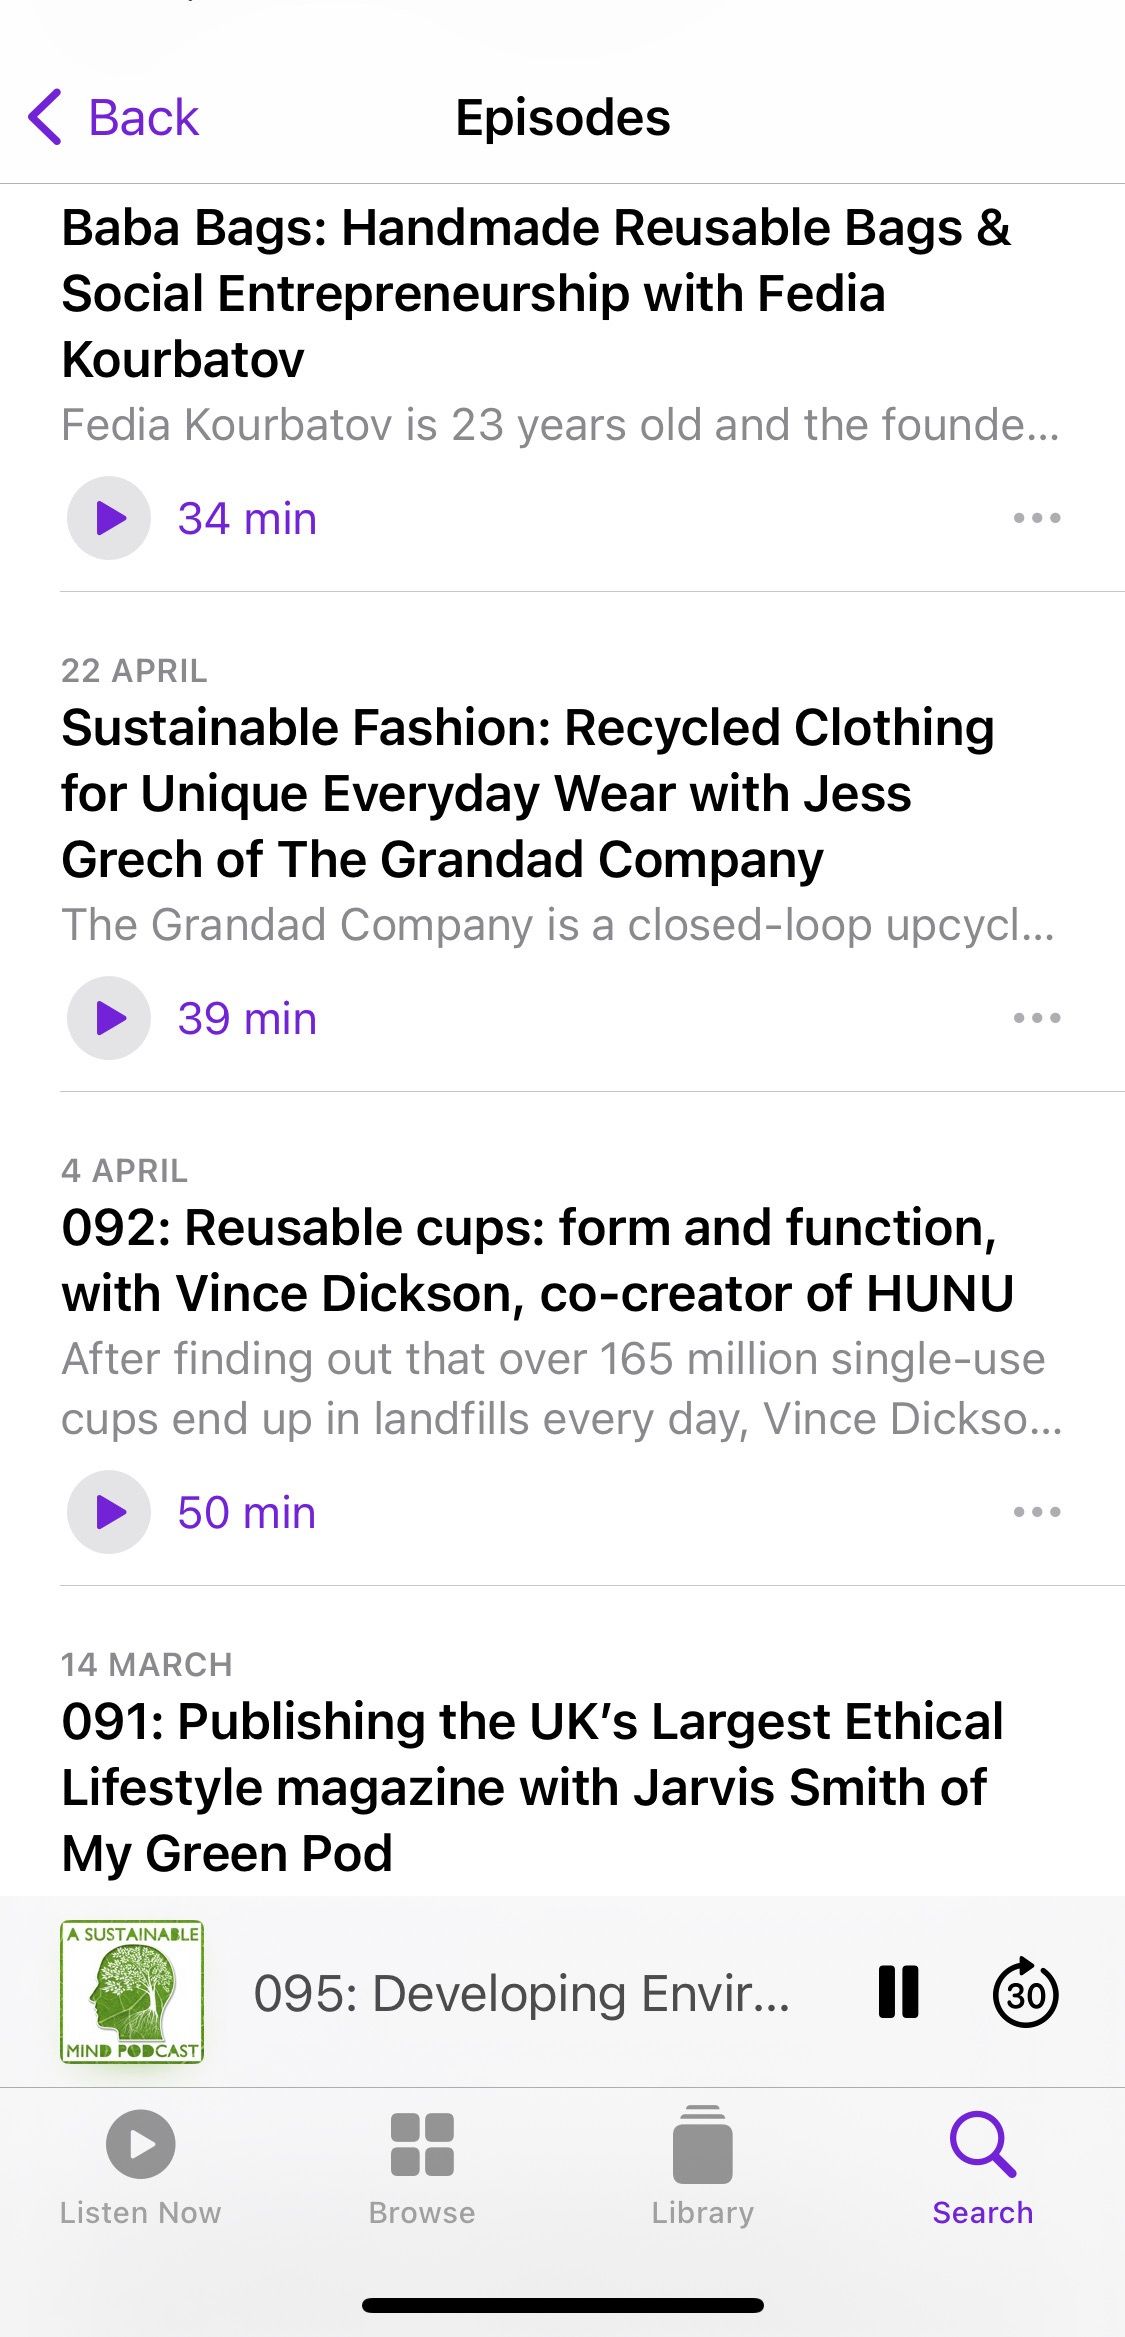 Screenshot showing A Sustainable Mind podcast sample episodes